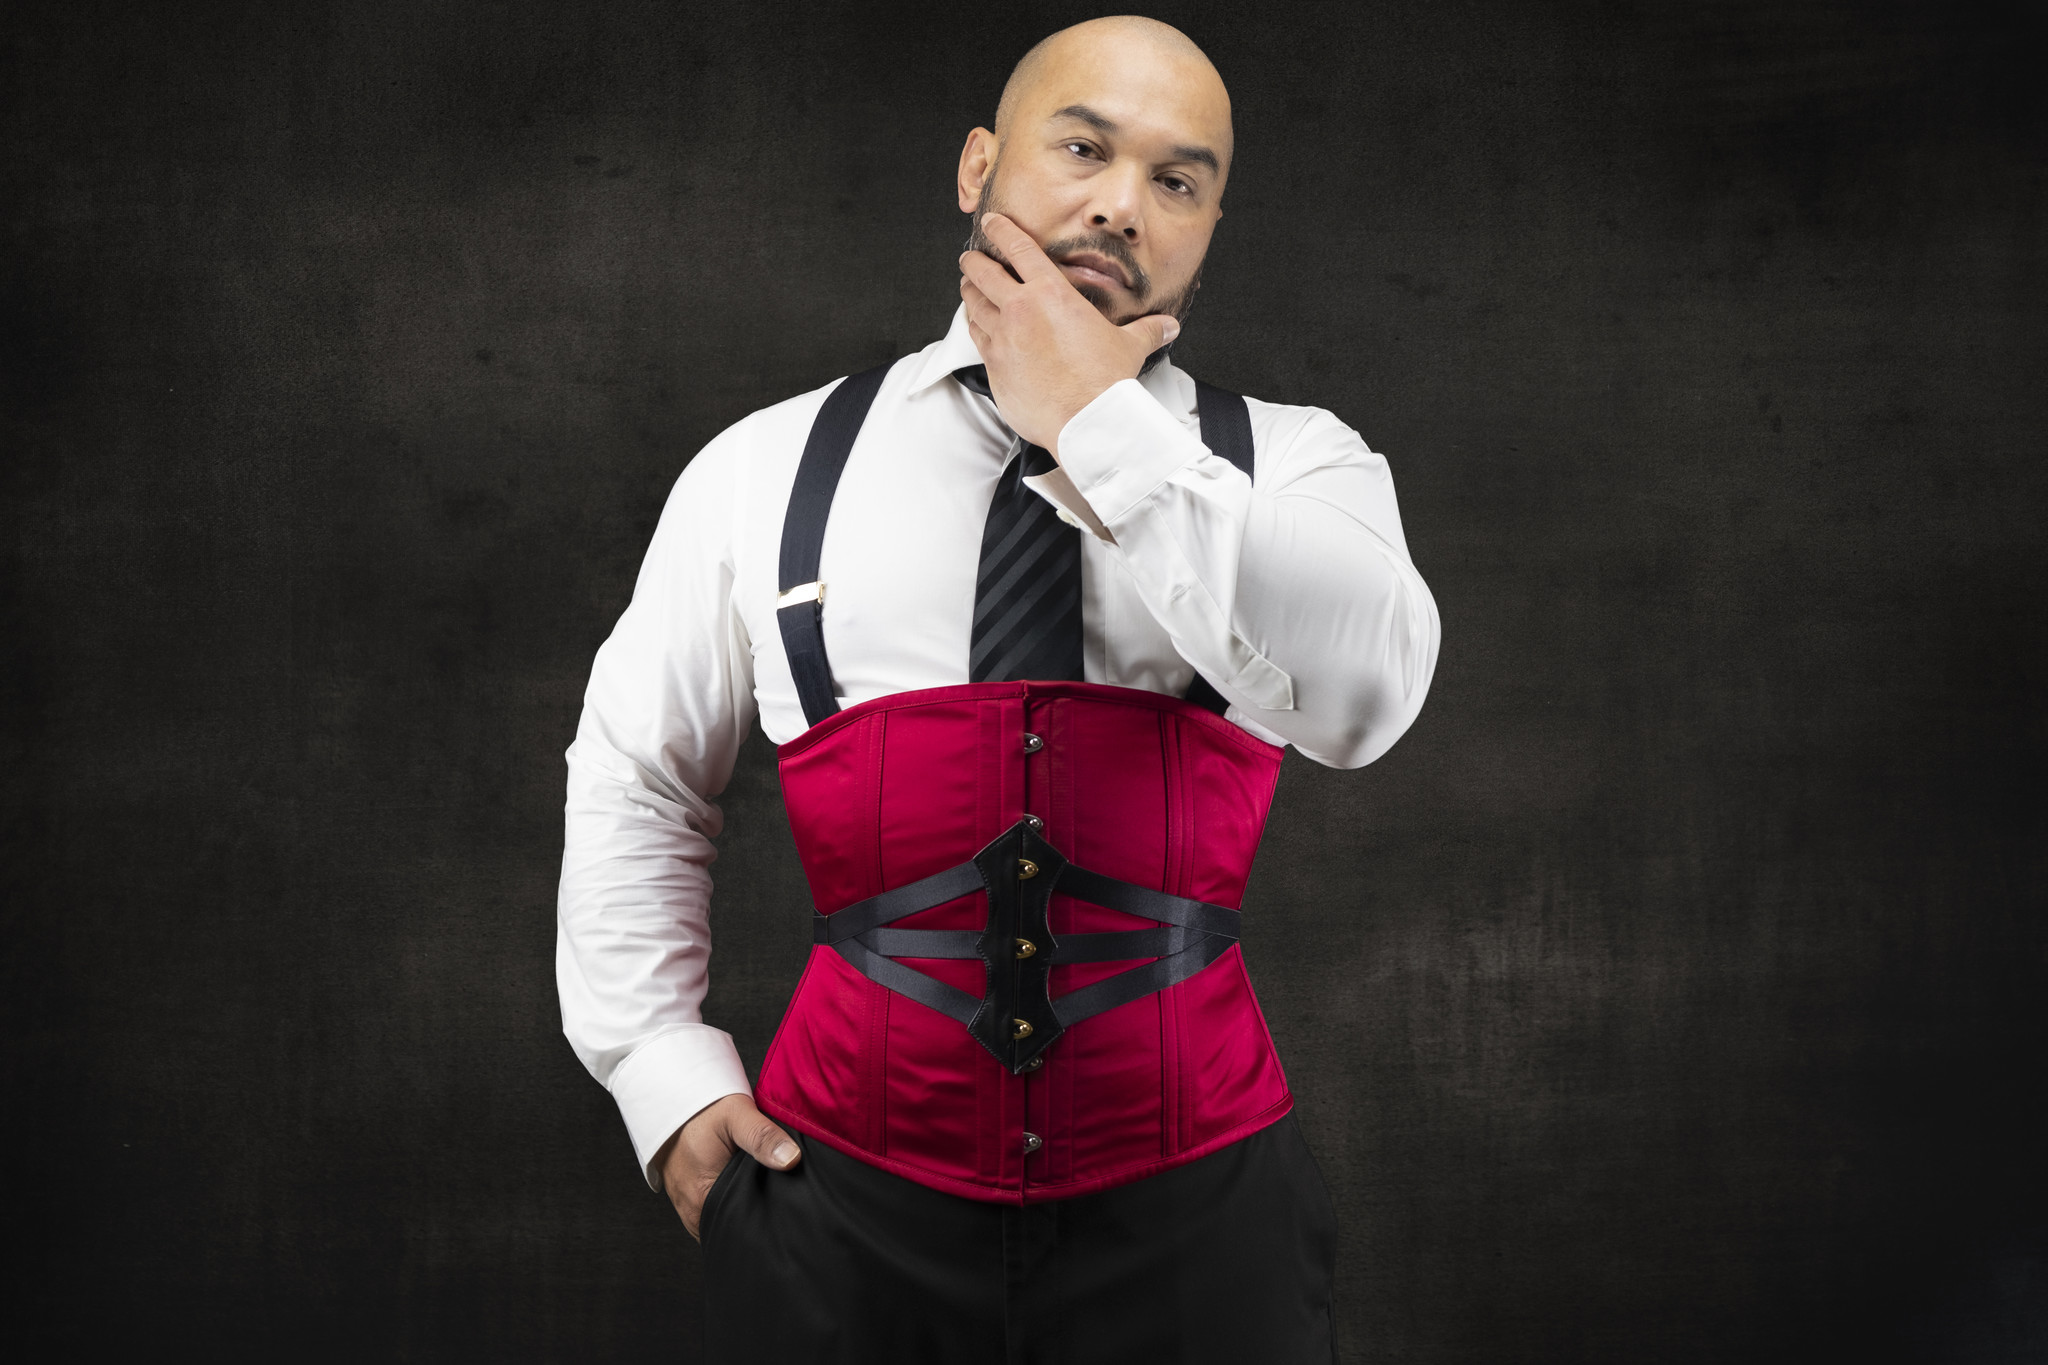 Corsets for men are having a moment in fashion